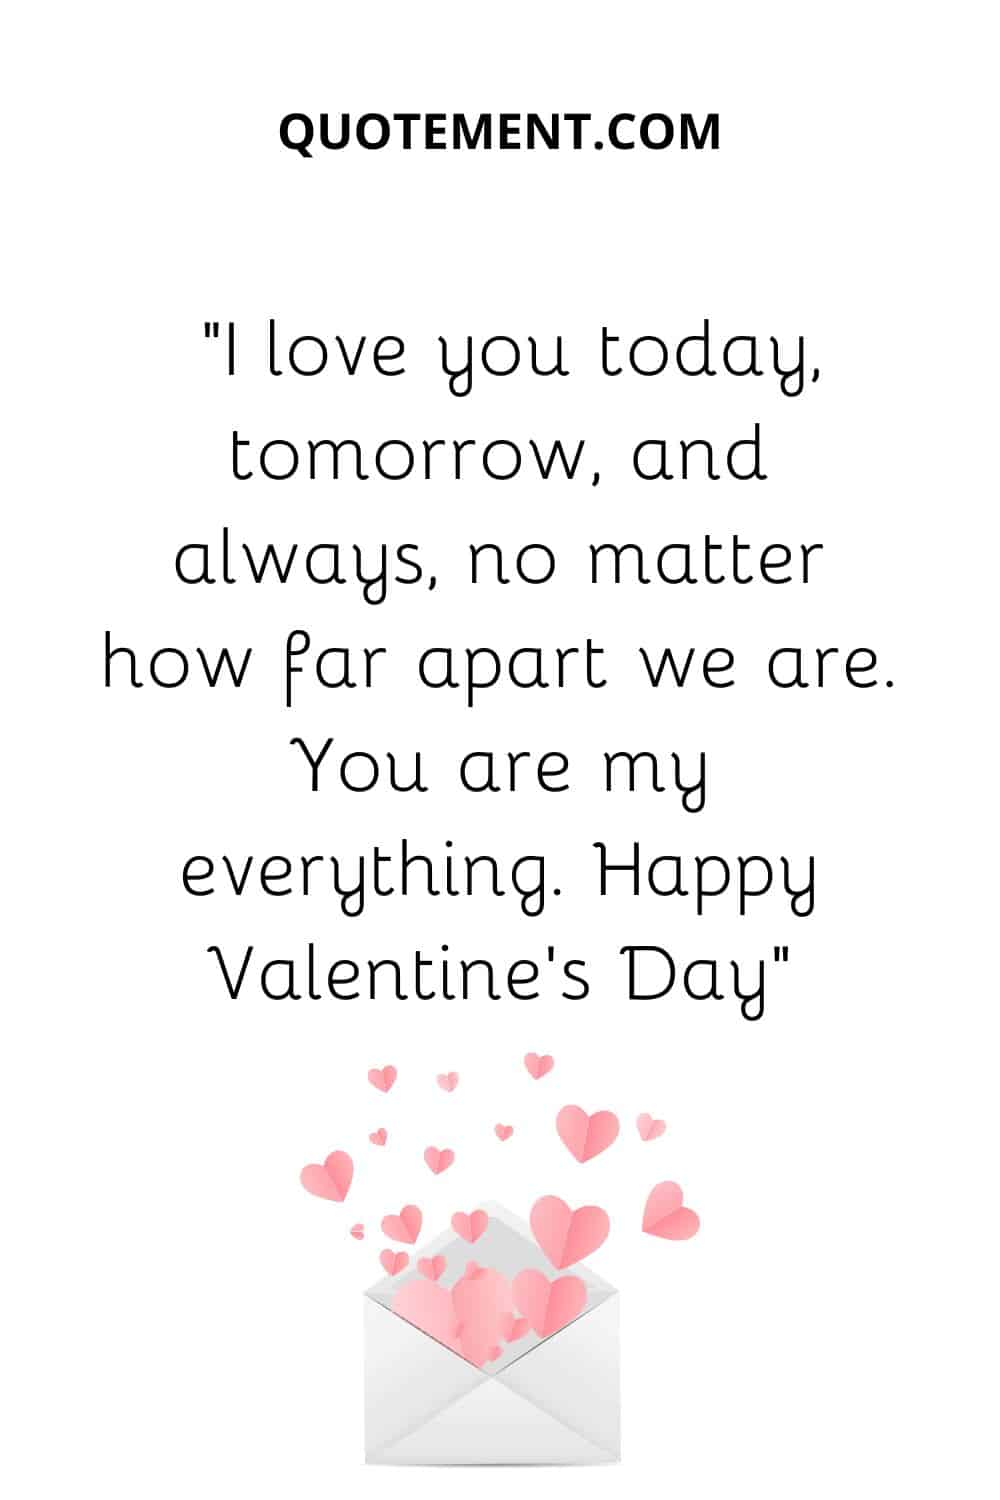 “I love you today, tomorrow, and always, no matter how far apart we are. You are my everything. Happy Valentine’s Day”